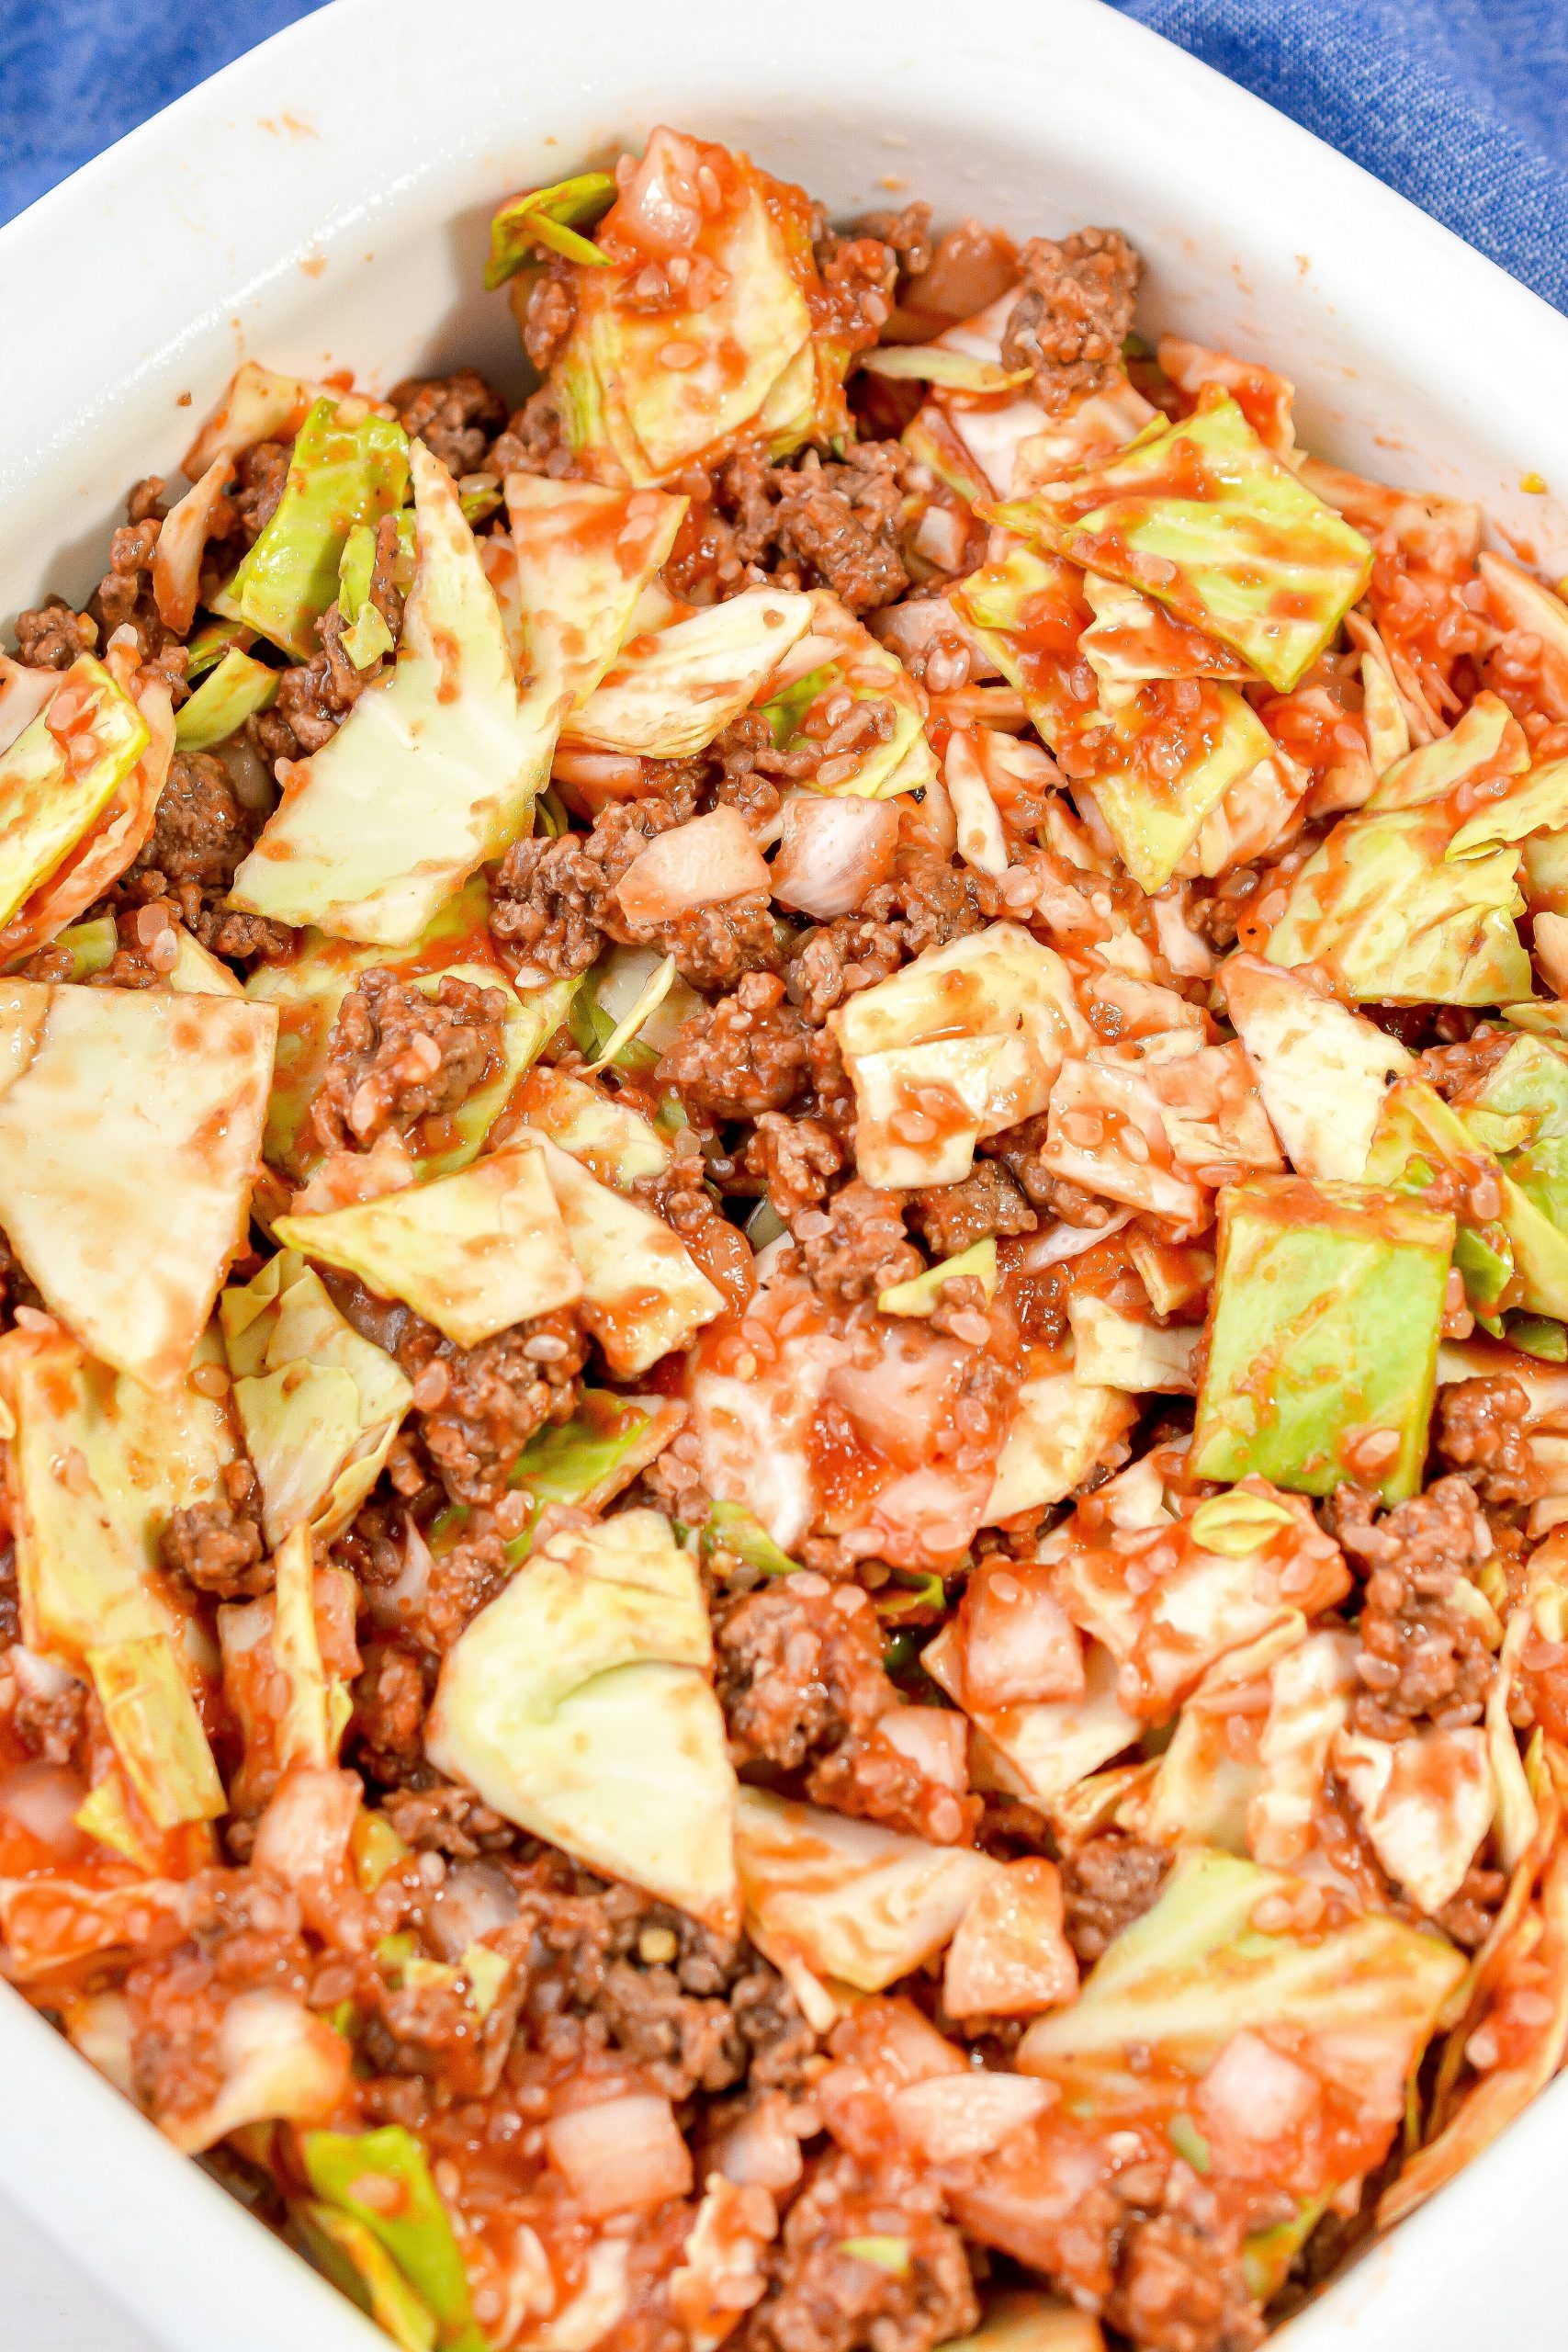 Layer the cabbage and meat mixture in the bottom of a 9x9 baking dish